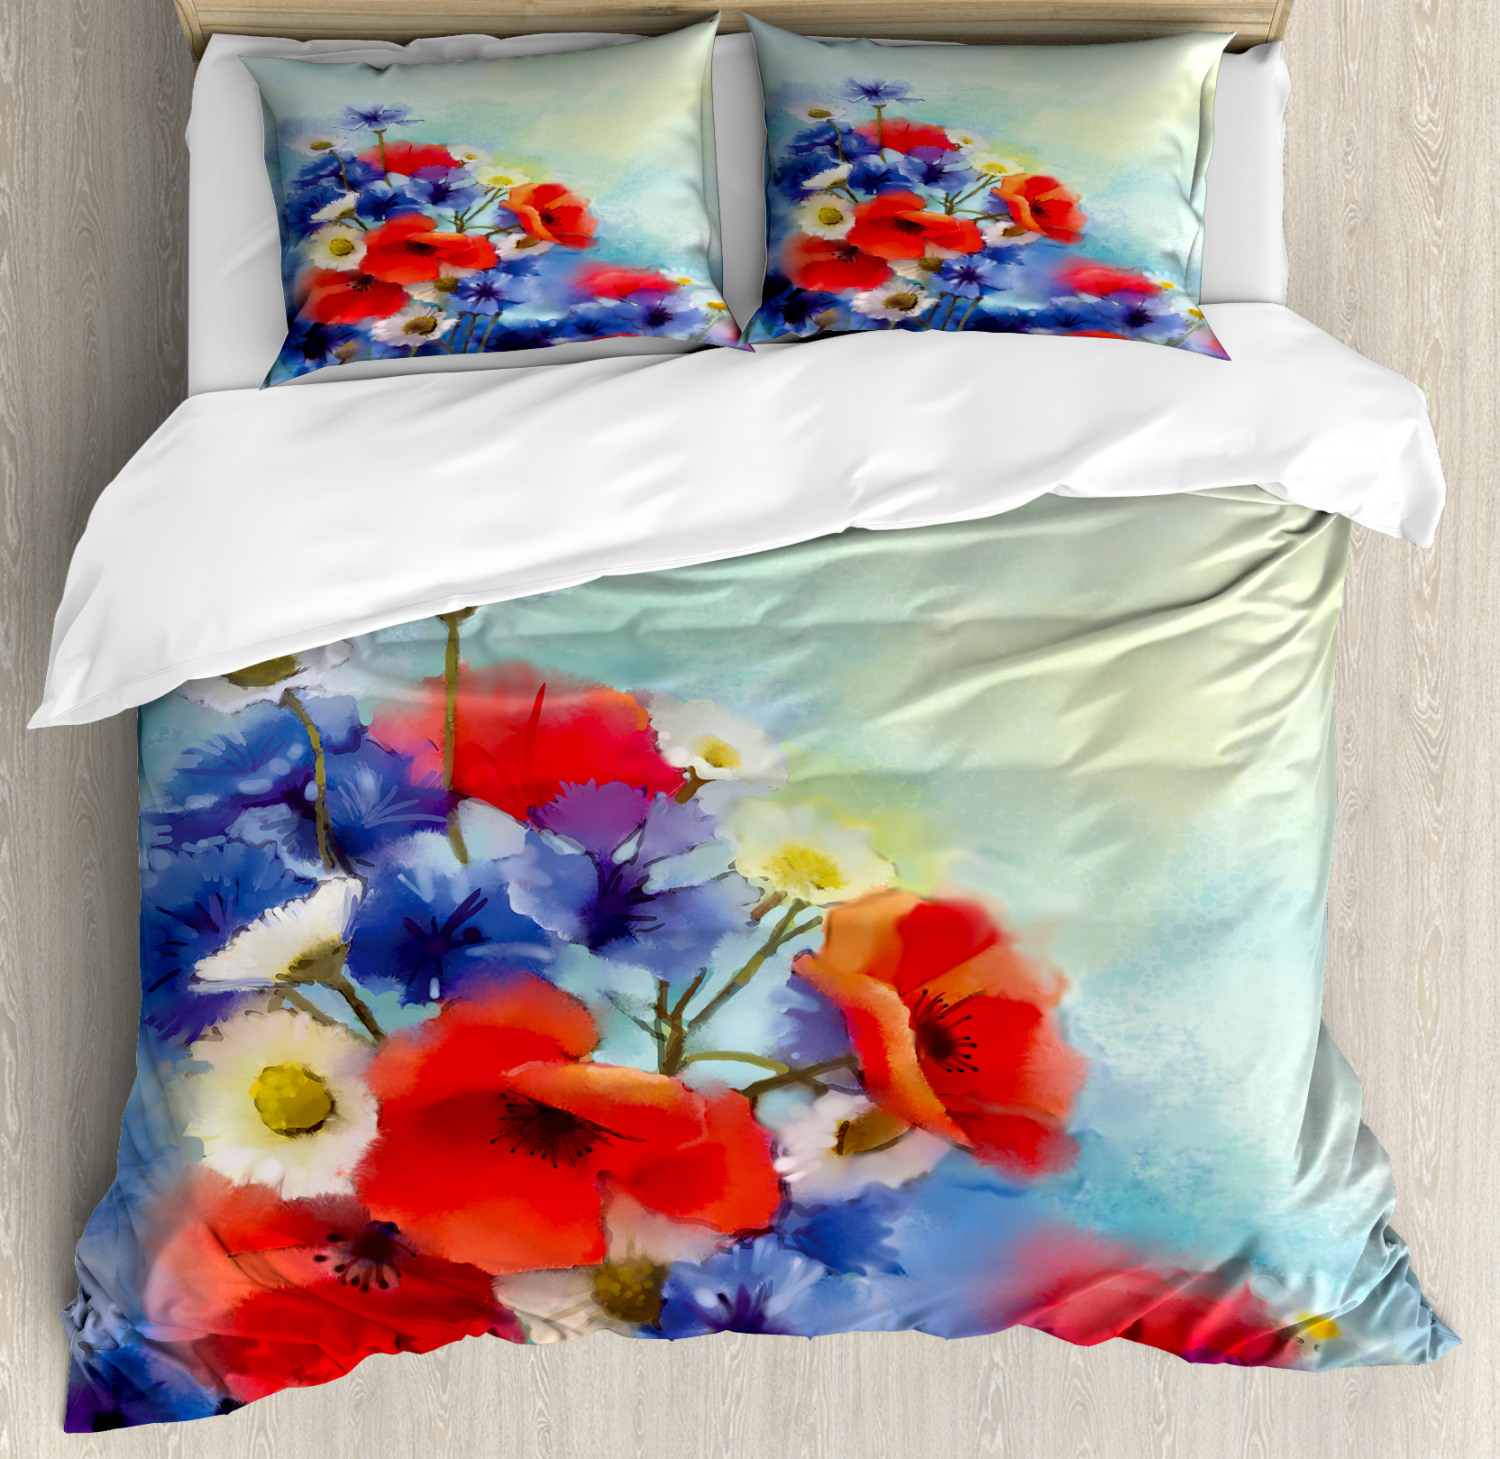 Watercolor Flower Home Decor Queen Size Duvet Cover Set, Close Up Structured Bouquet with Flower Types Poppy Peace Design, Decorative 3 Piece Bedding Set with 2 Pillow Shams, Red Blue, by Ambesonne - image 1 of 3